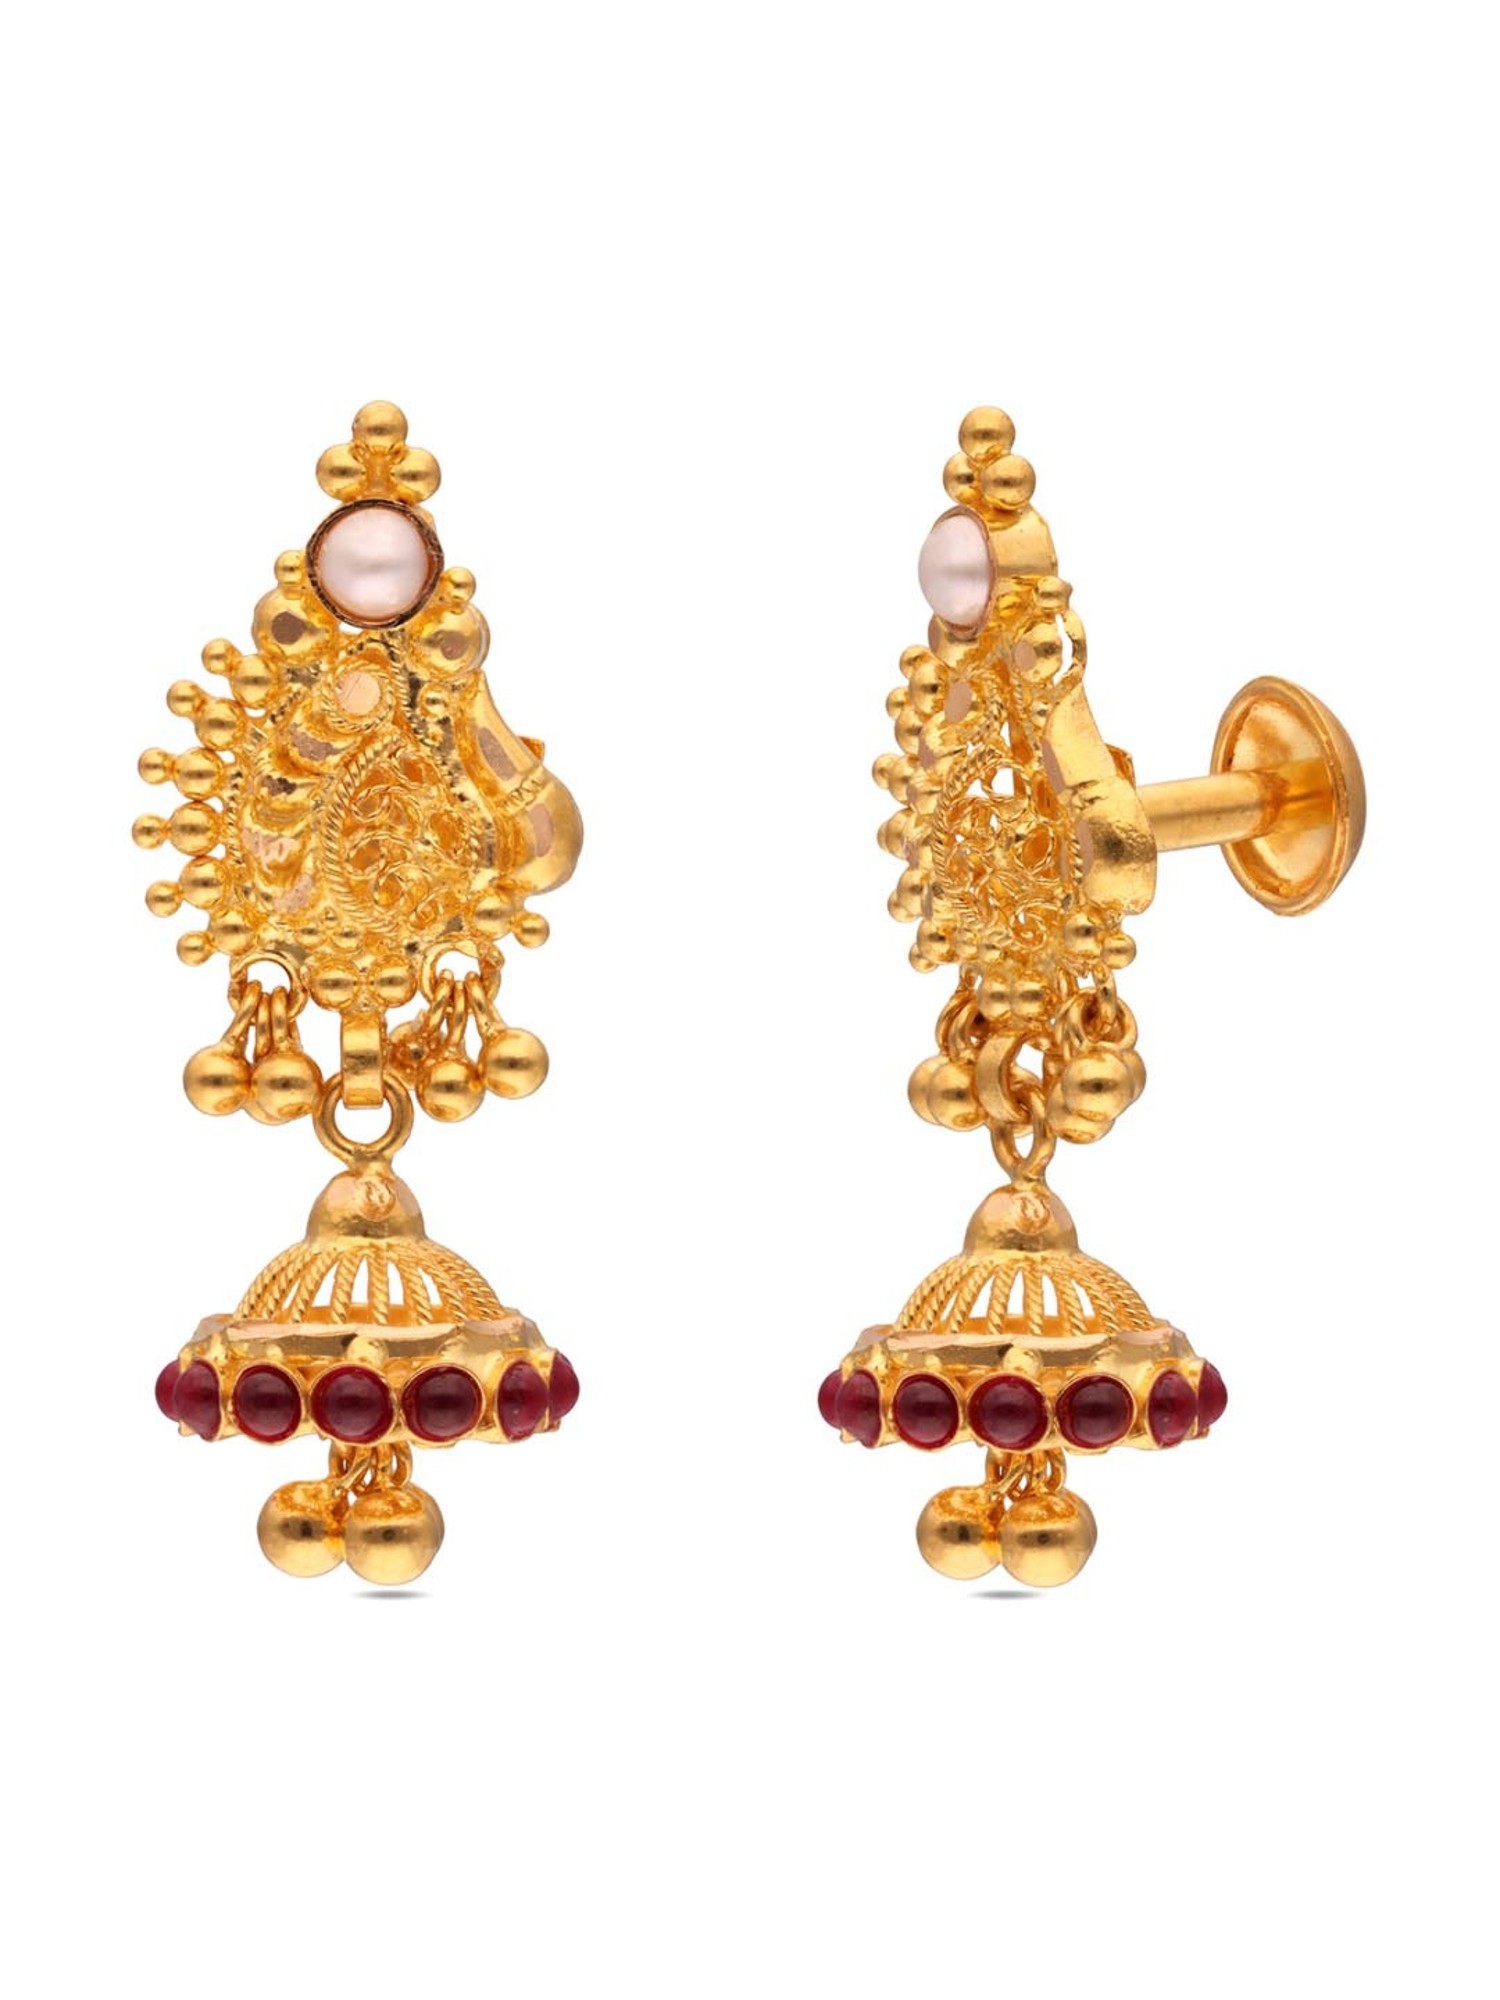 Female Pure Gold Earrings, Weight: 10 Grams at Rs 45000/gram in Bengaluru |  ID: 22147711512